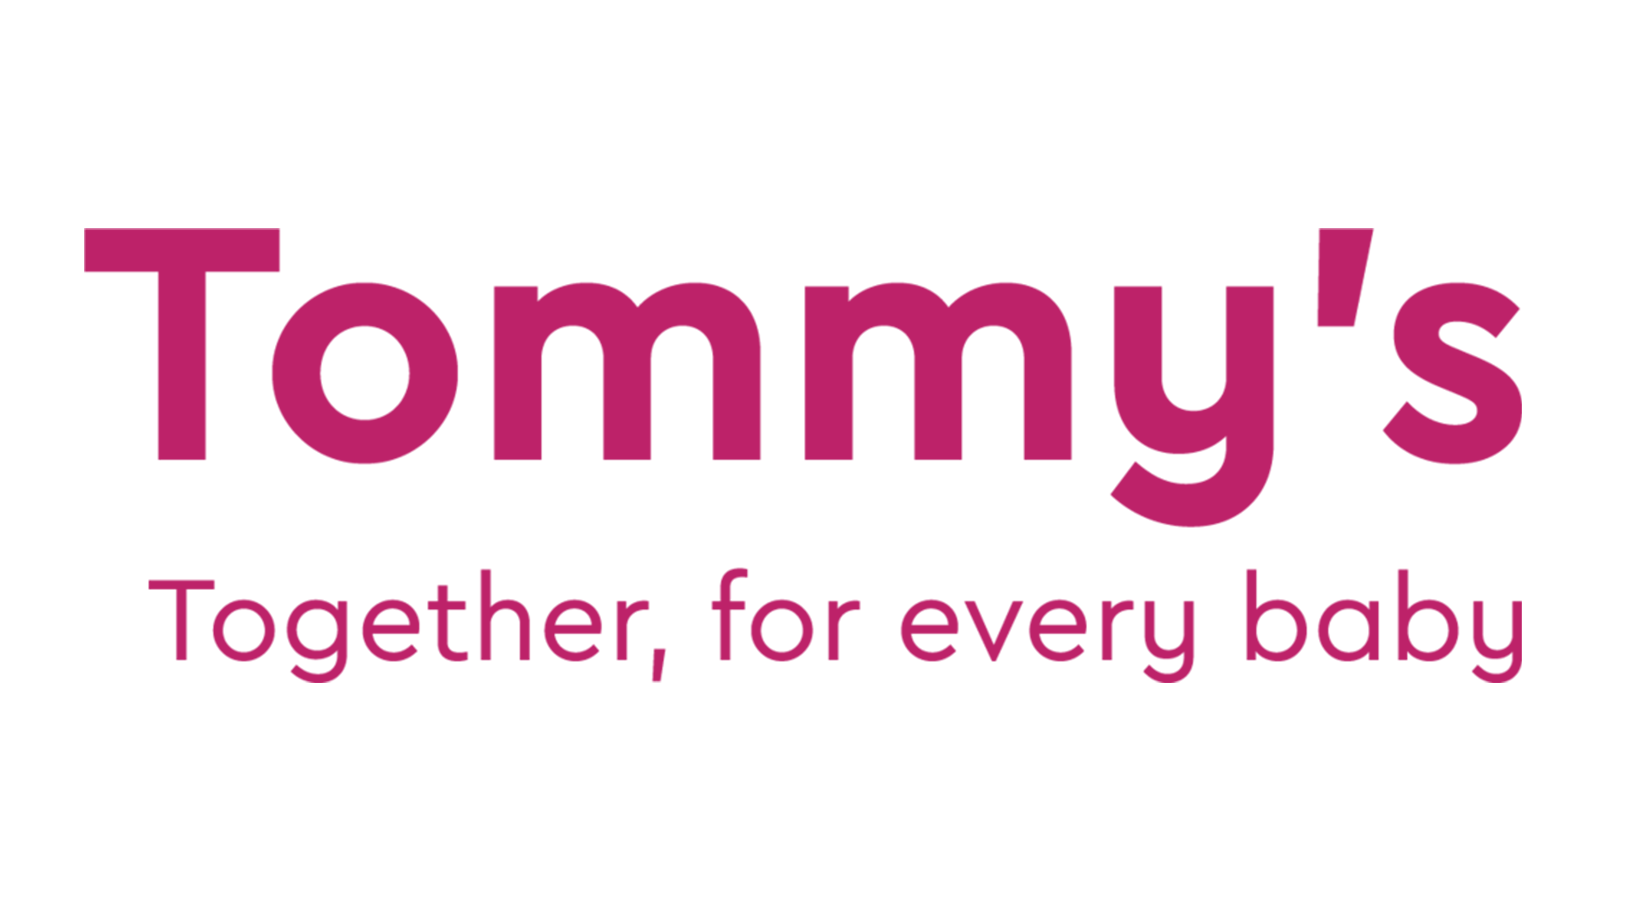 Tommy's logo, text reads: Together for every baby